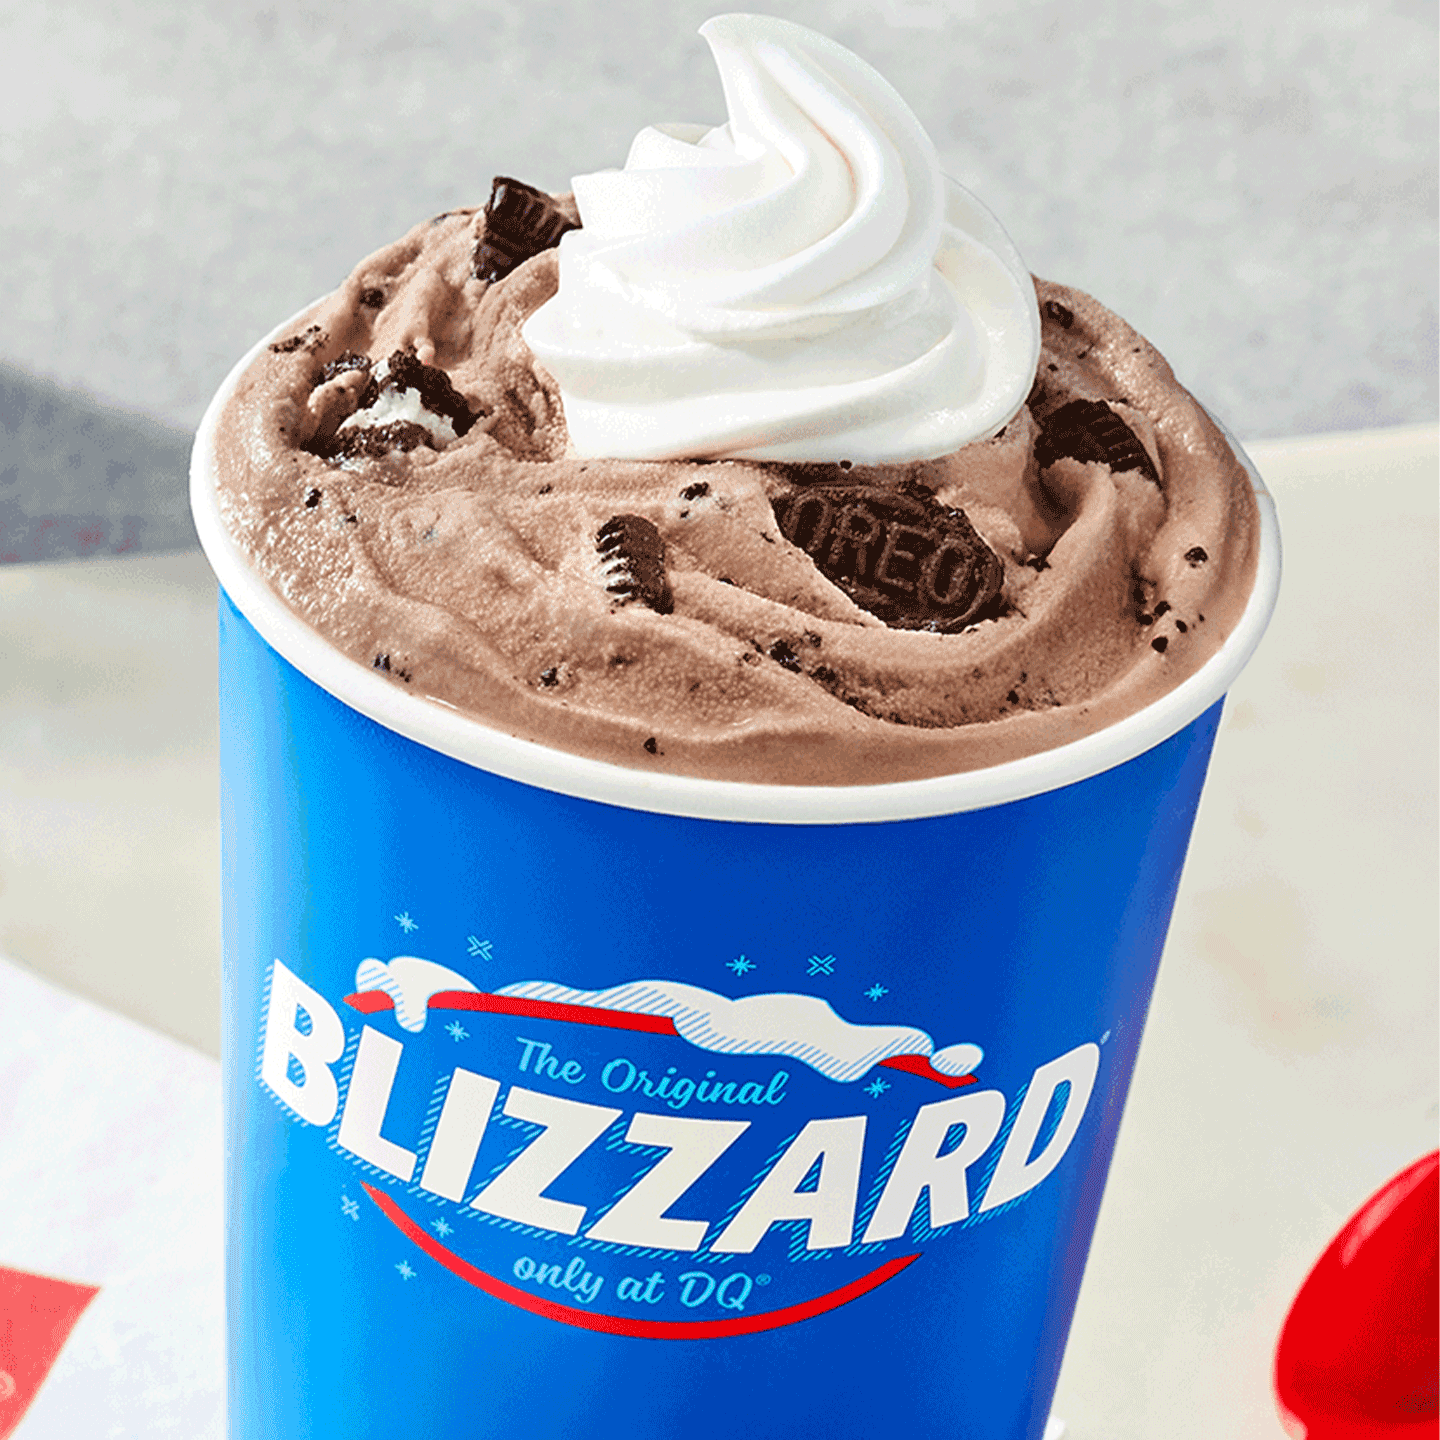 October's Blizzard Treat of the Month